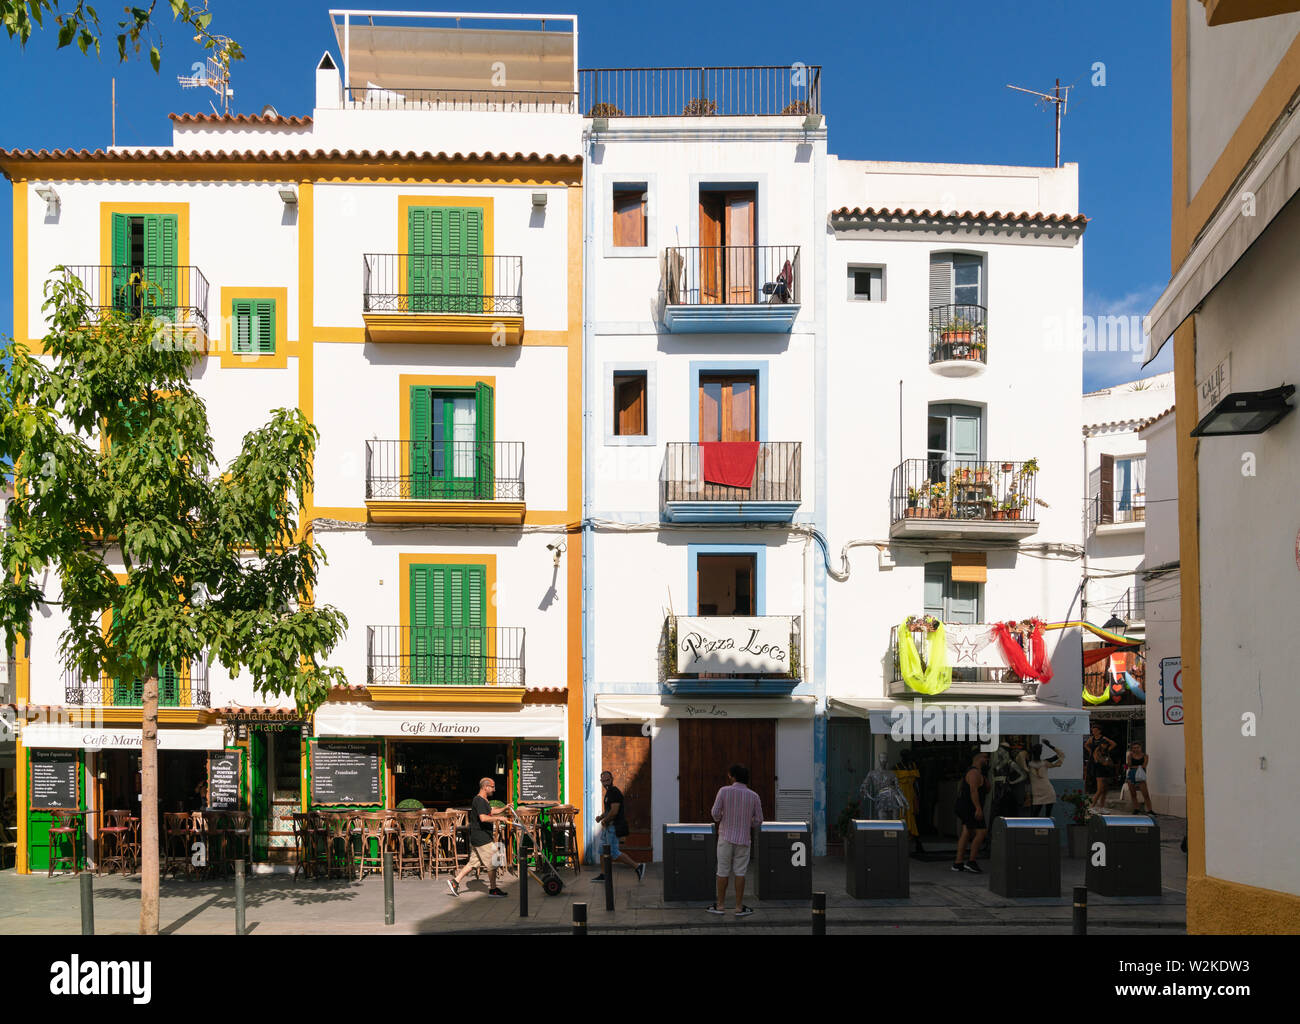 22th June 2019 - Ibiza, Spain. Colorful old spanish house in the Old Town of Eivissa. Famous travel destination located in Europe. Stock Photo